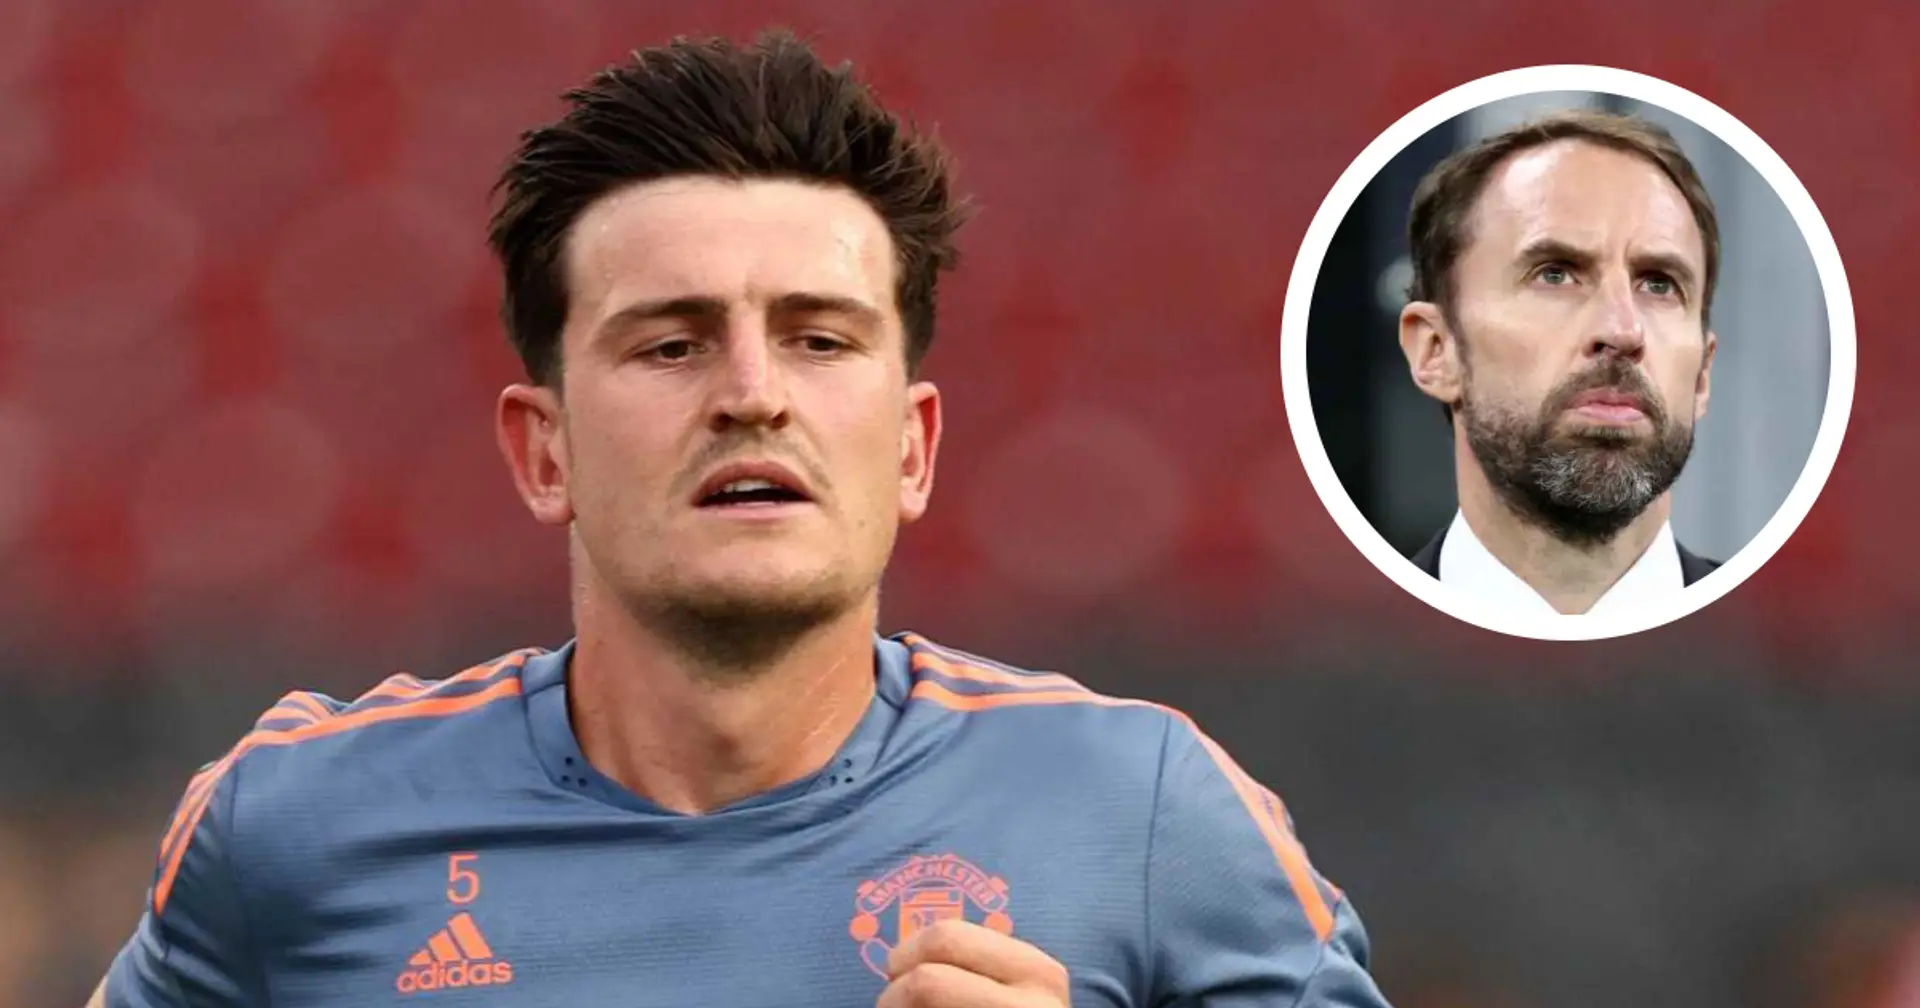 Daily Mail: Harry Maguire could be available for Man United 'next week'